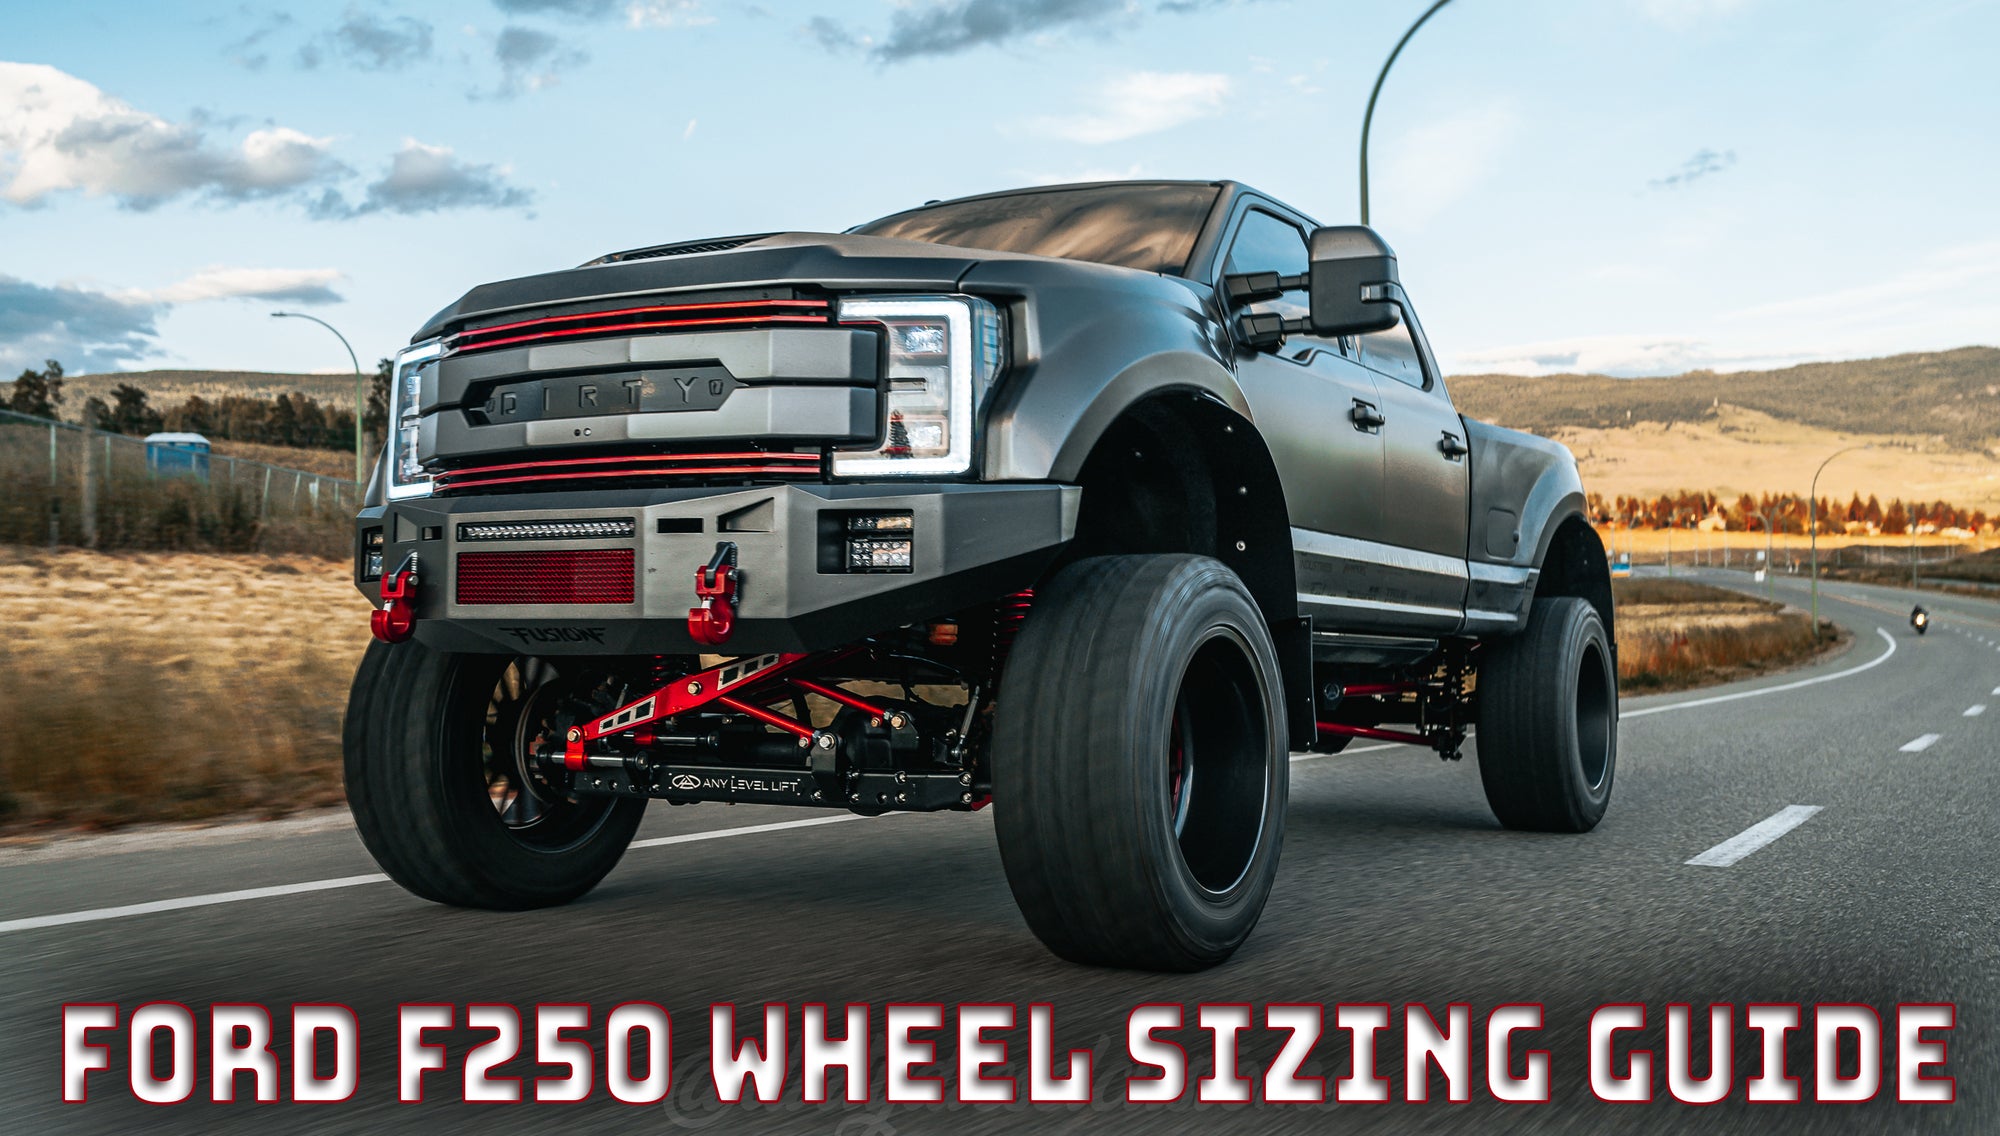 F-250 Wheels: What rims will fit on my Ford Powerstroke?